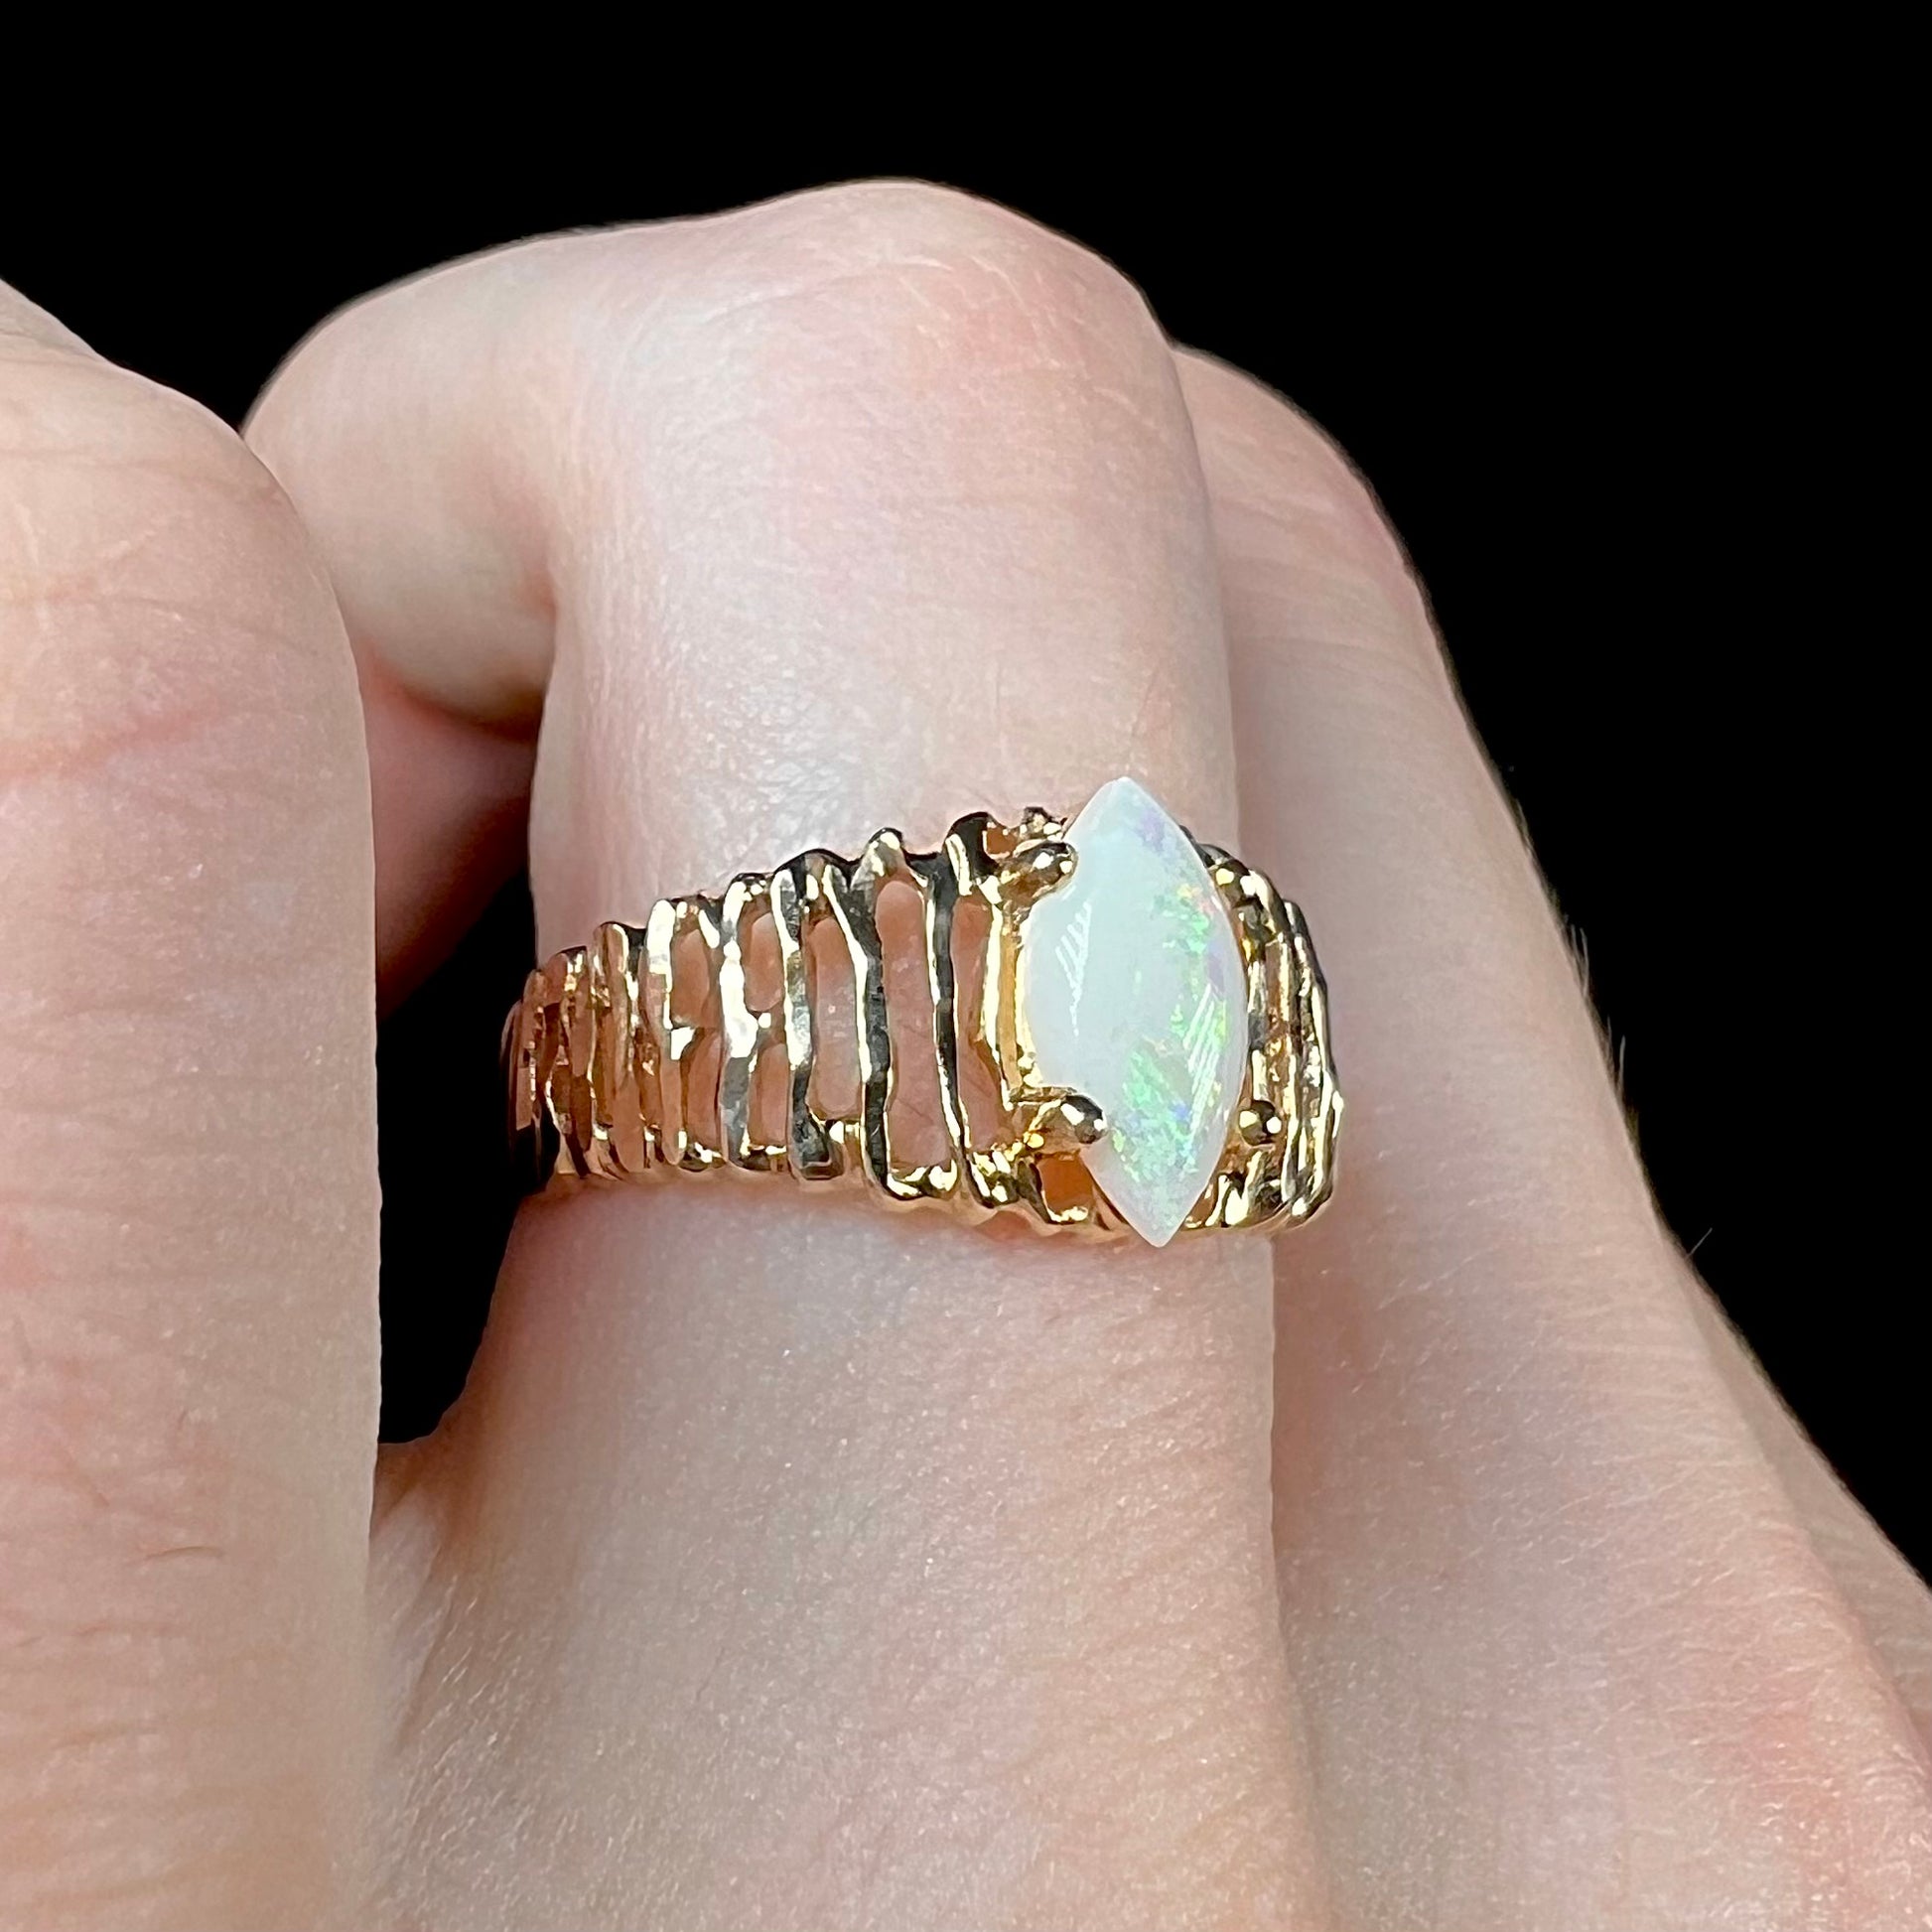 A ladies' yellow gold diamond-cut ring prong set with a natural, marquise cut white opal stone.